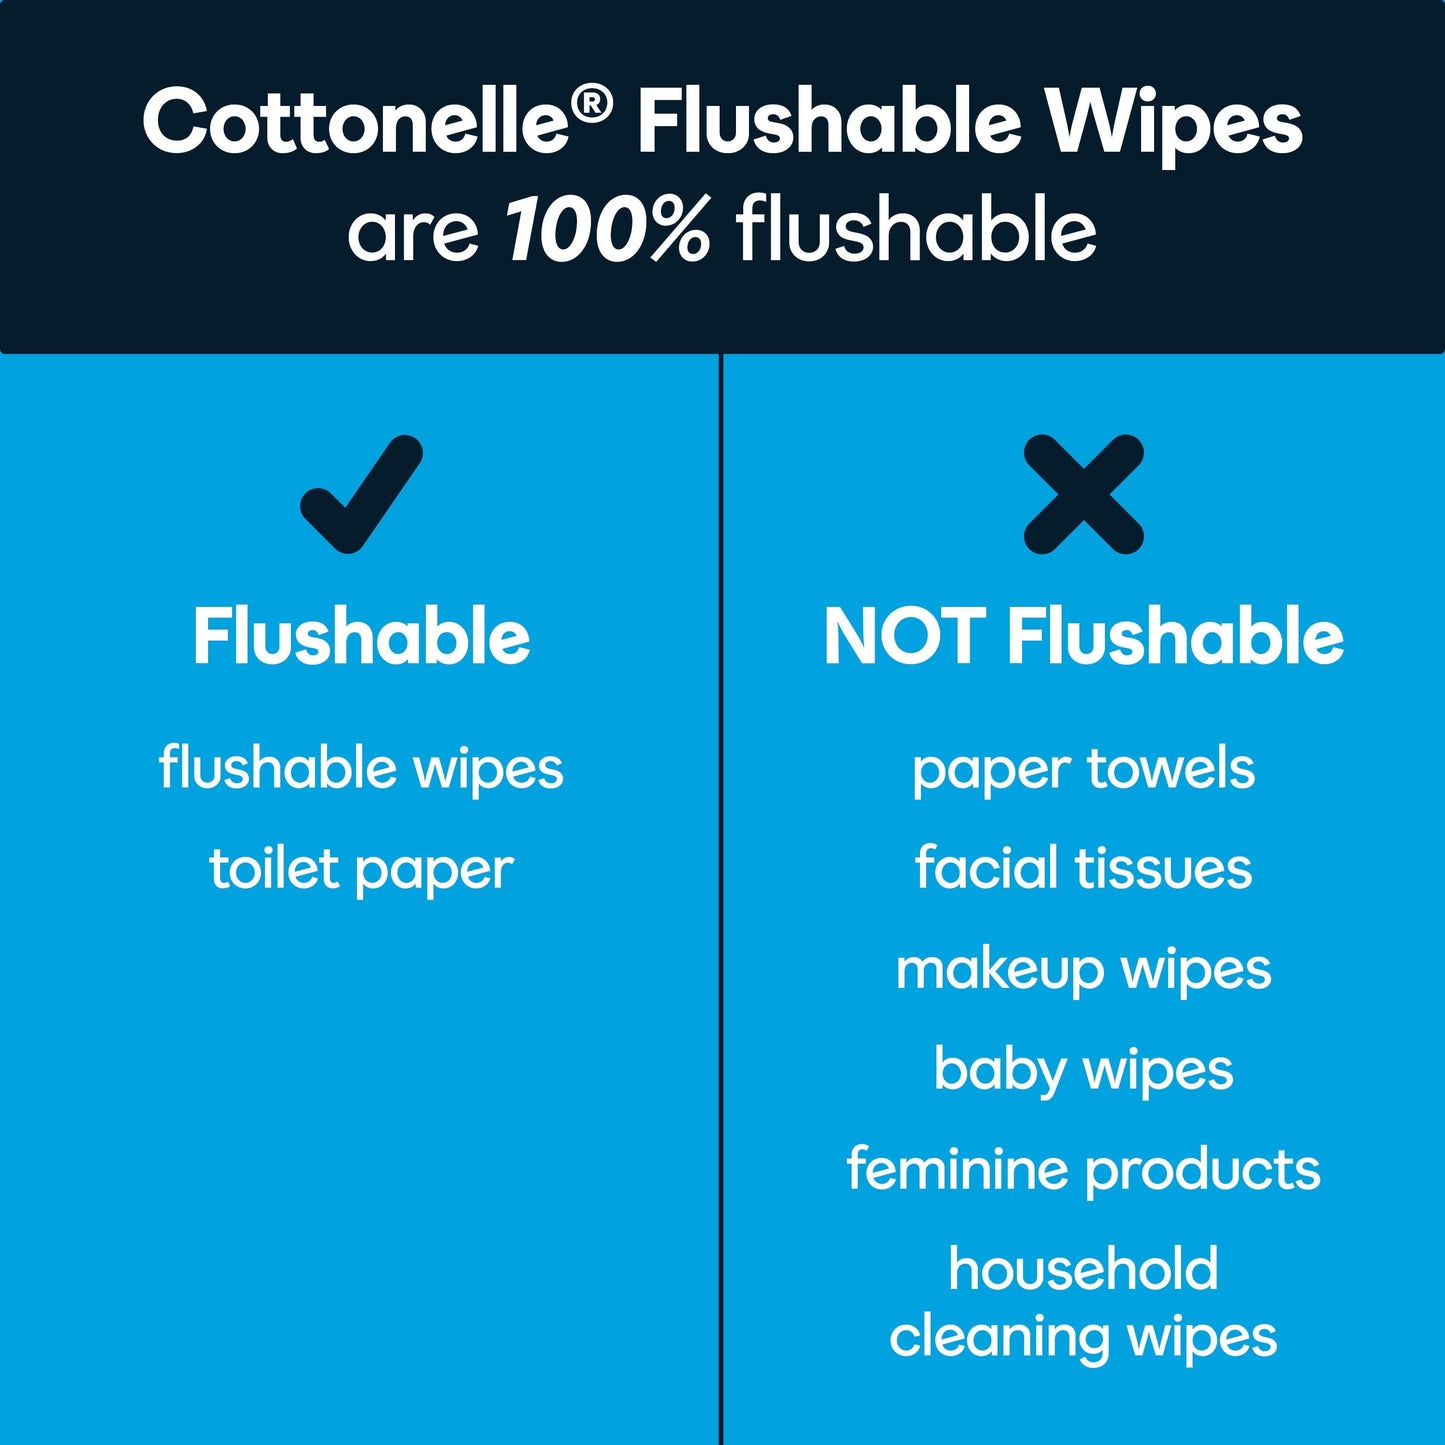 Cottonelle Fresh Care Flushable Wipes, 1 Resealable Bag, 168 Wipes Per Pack (168 Wipes Total)